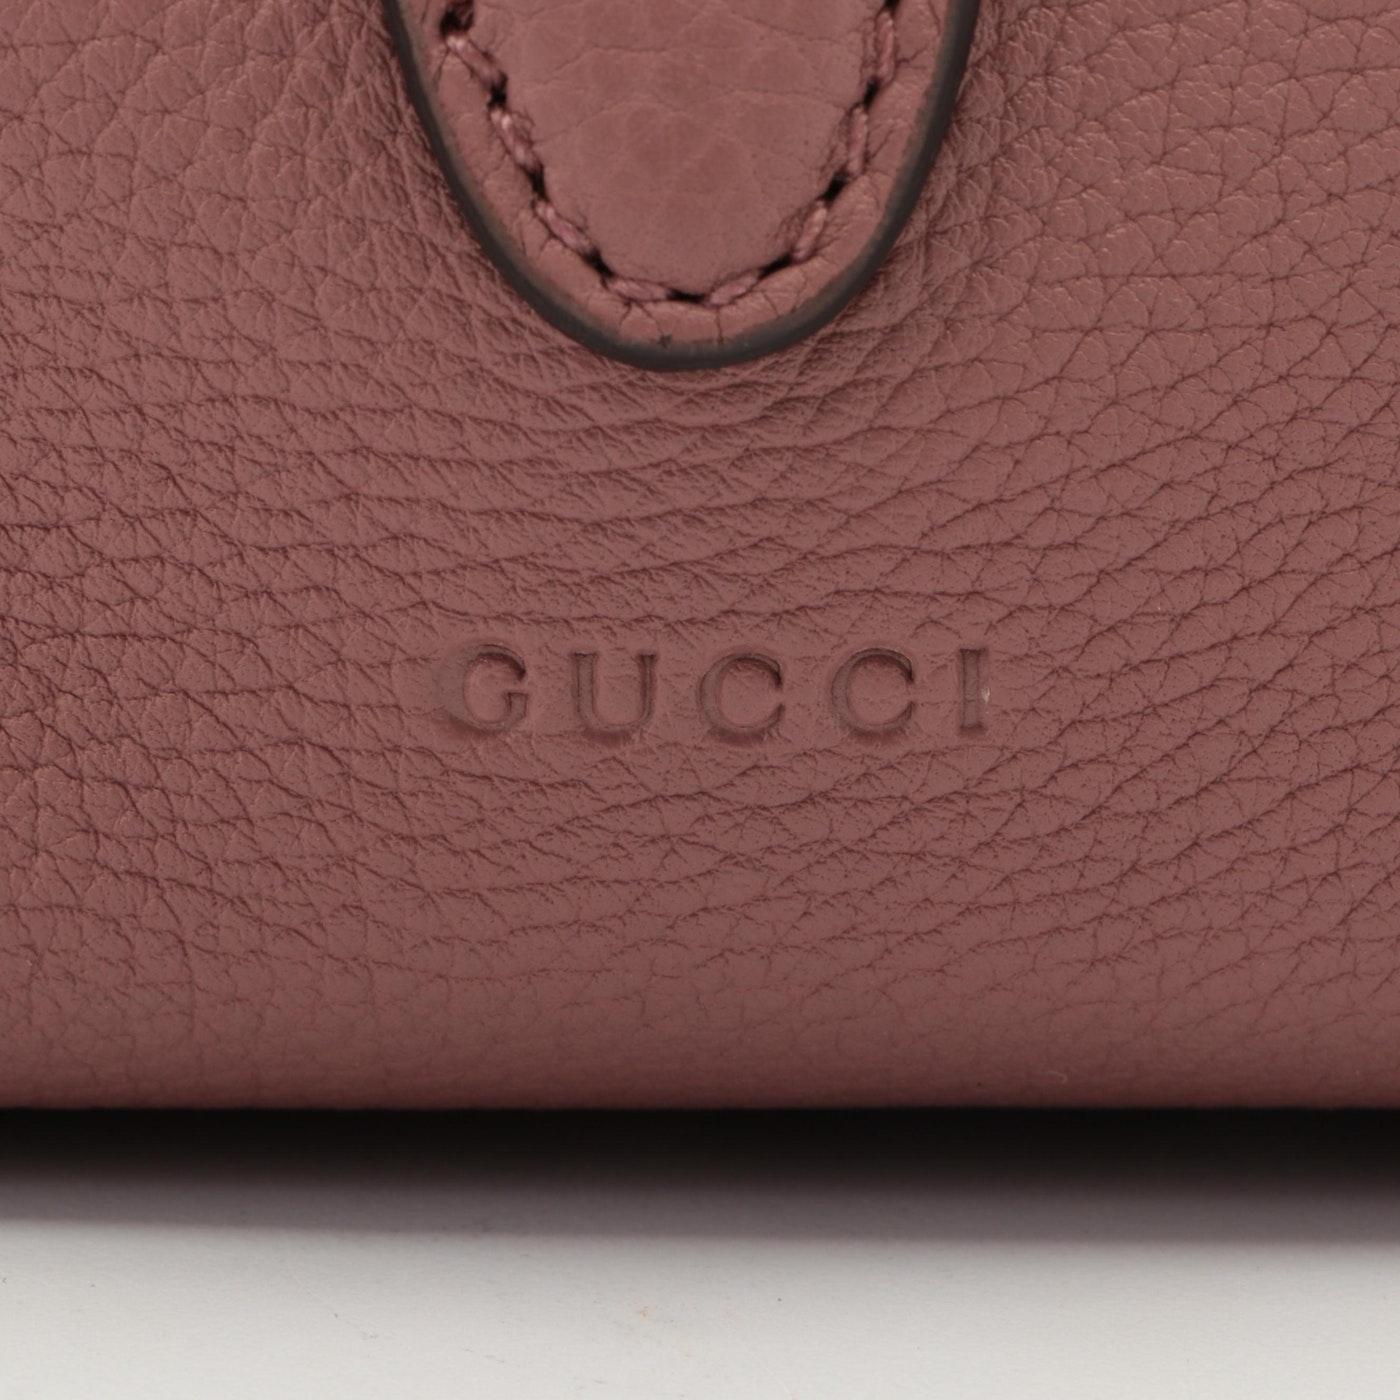 New Gucci Medium Soft Jackie Tote Bag in Full-Grained Leather w/ Piston Closure For Sale 3